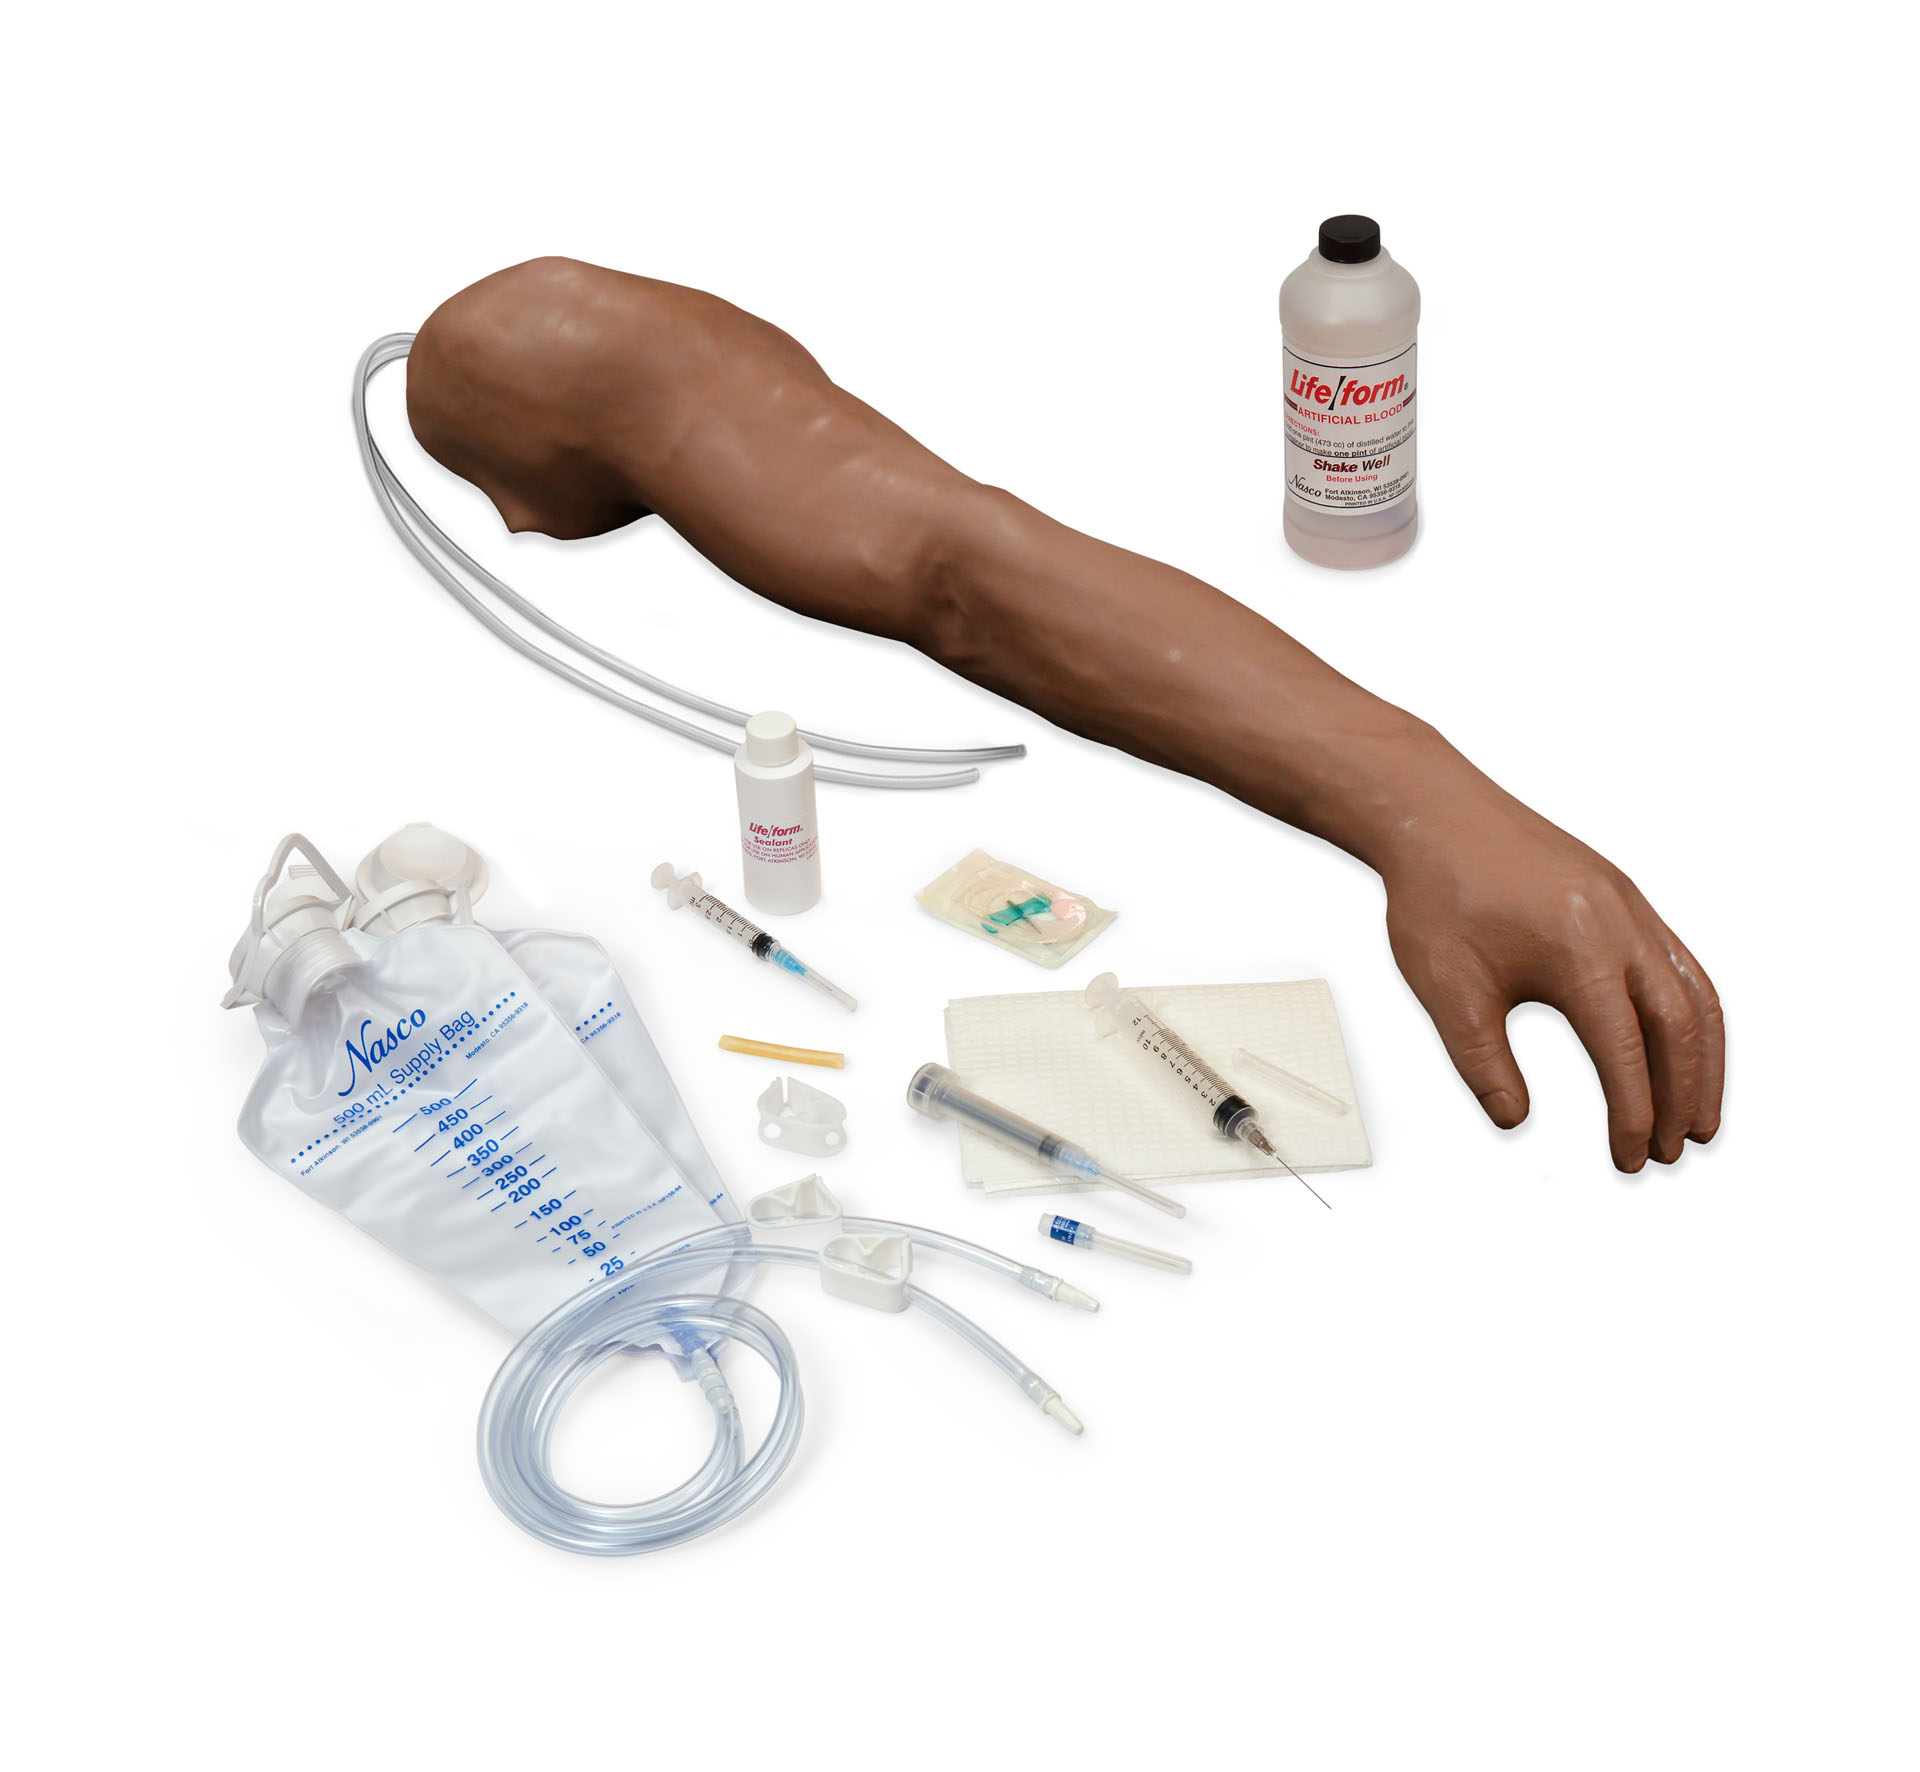 Advanced Venipuncture and Injection Arm, Medium